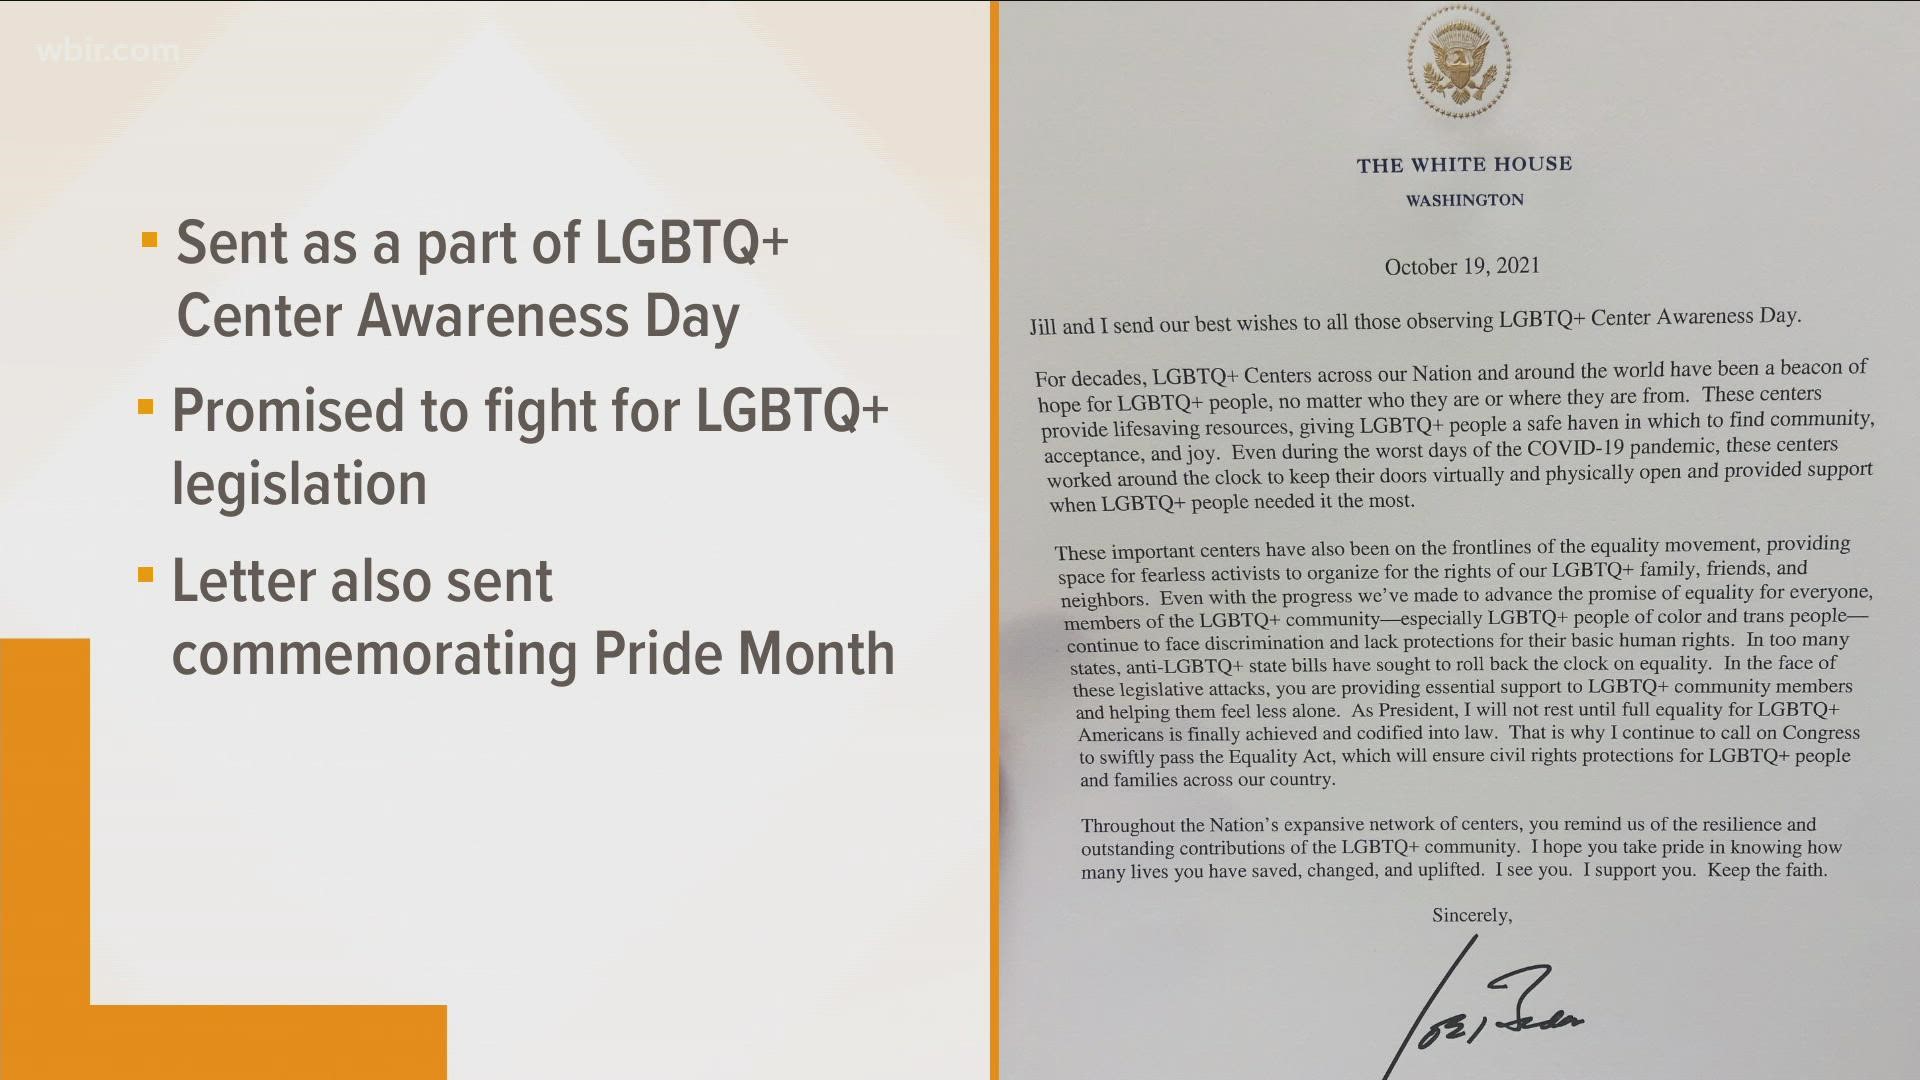 The pride center got a special letter from President Joe Biden as a part of LGBTQ+ Center Awareness Day.